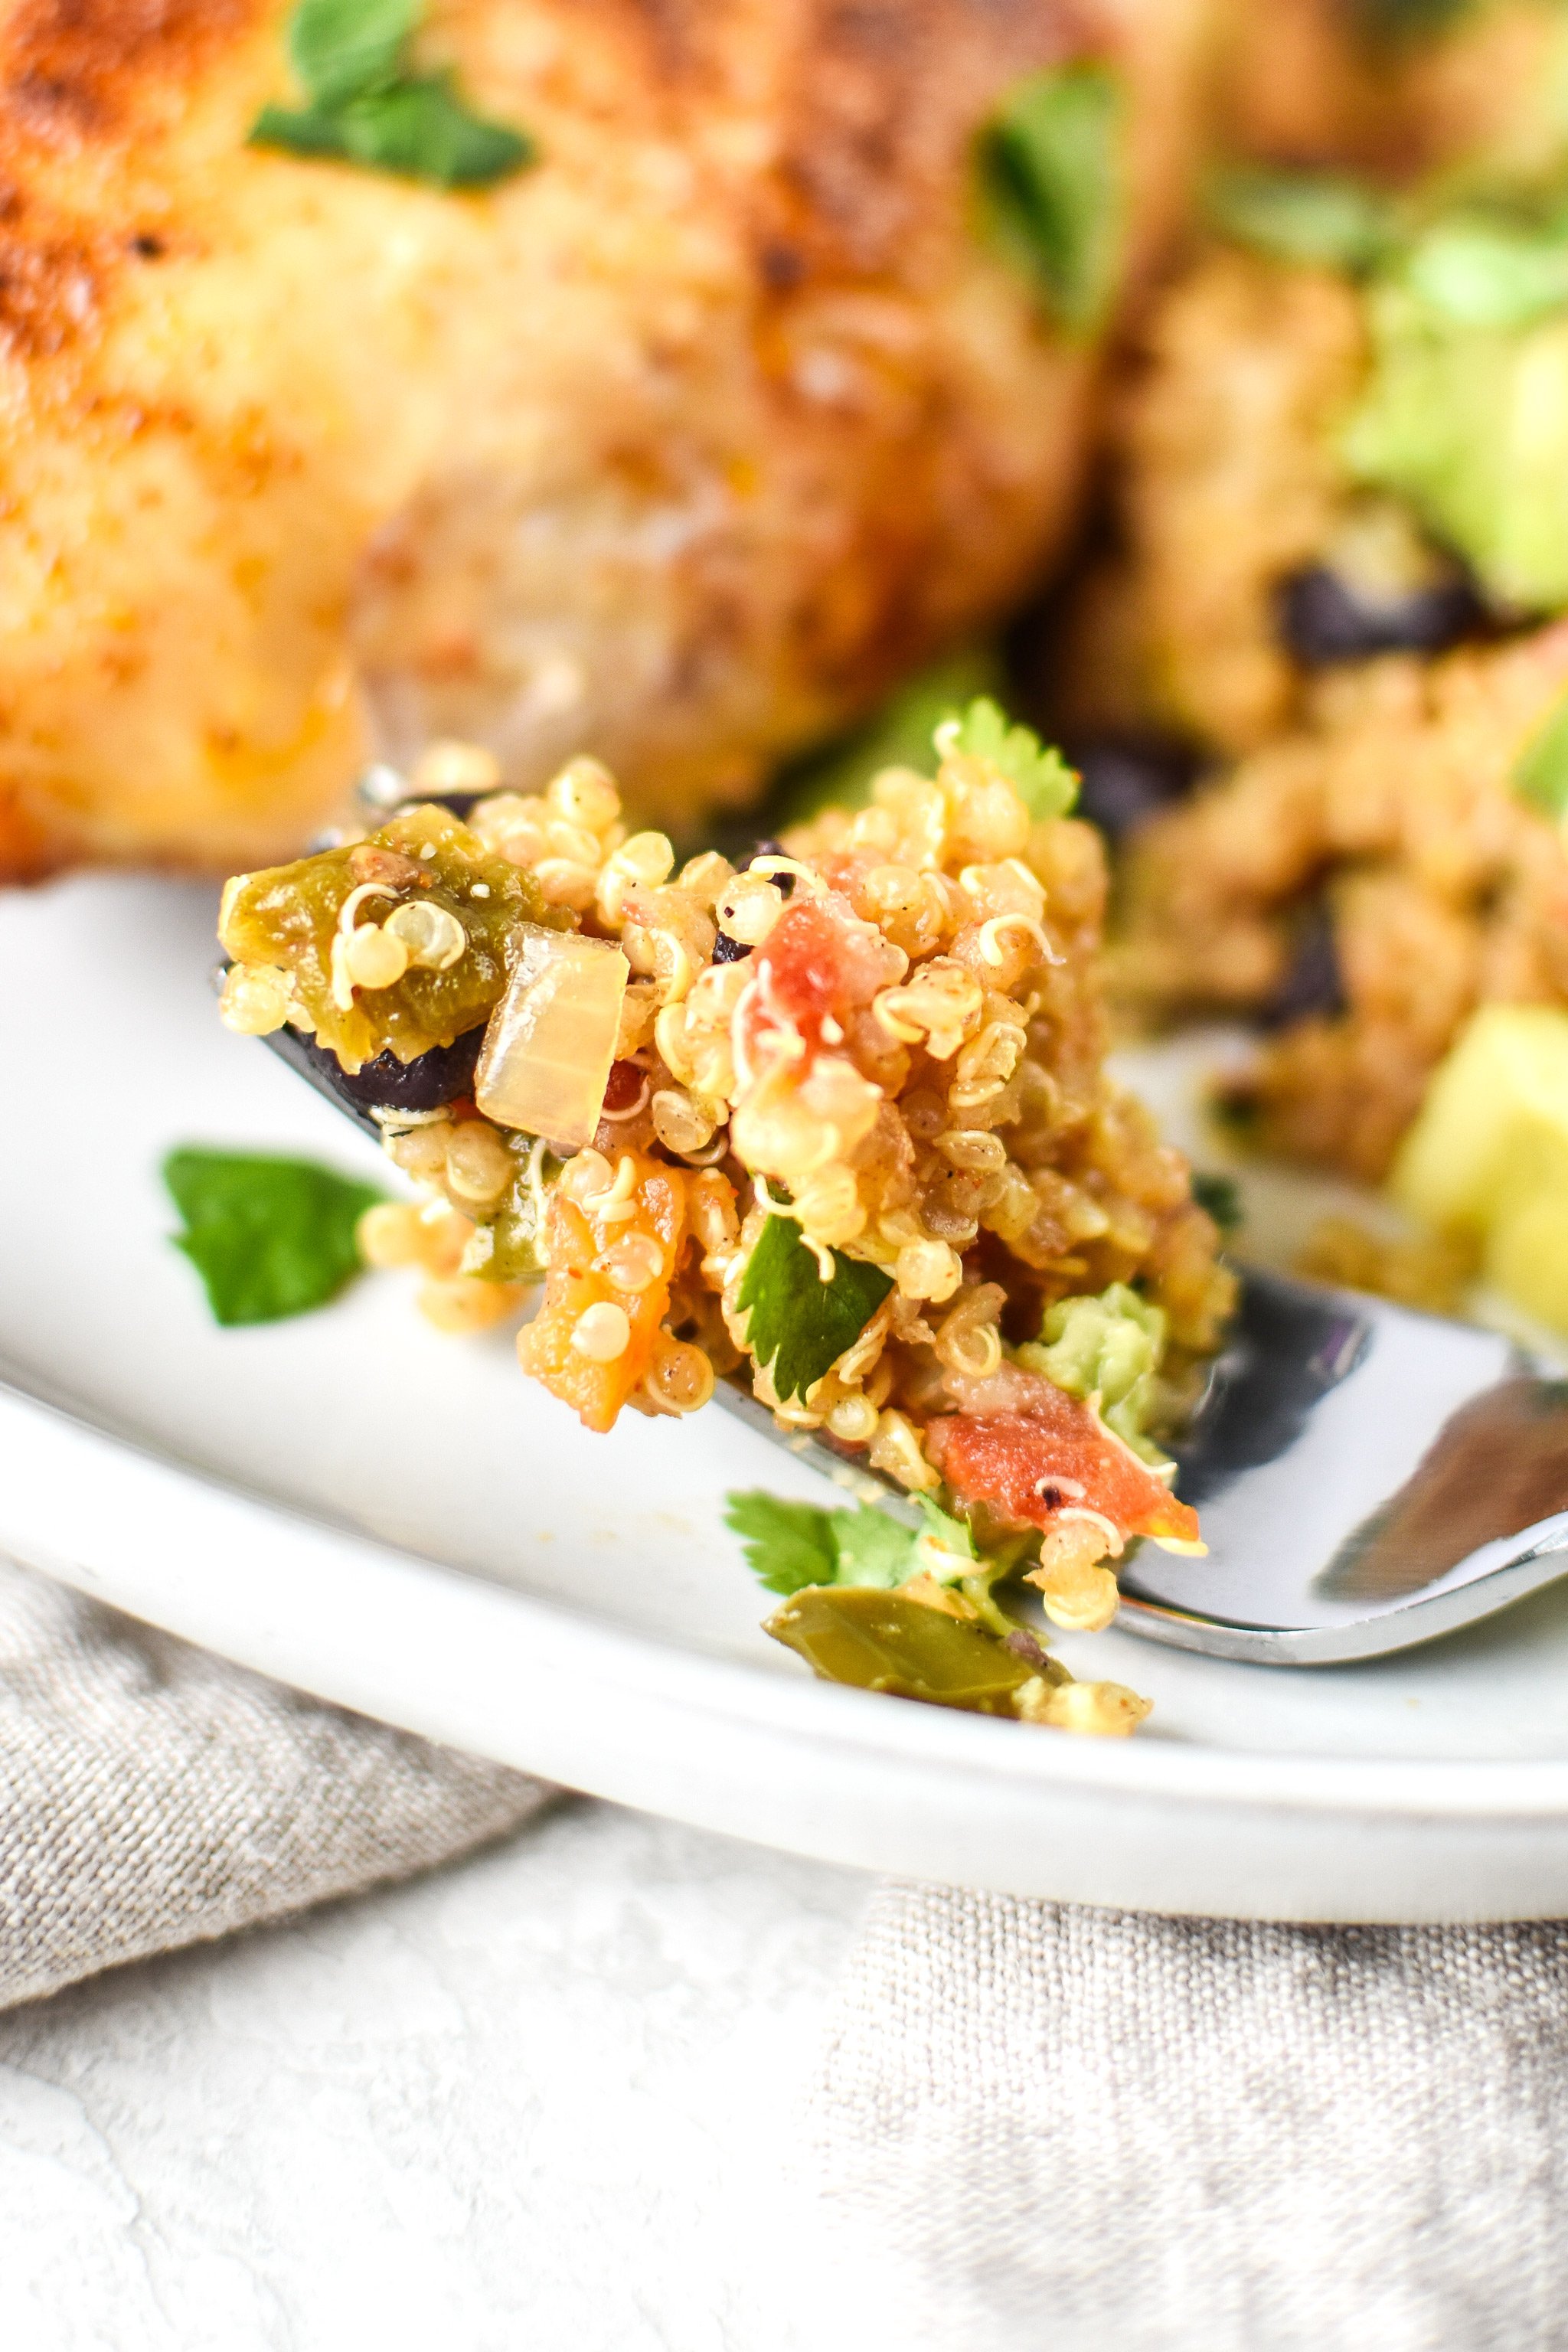 A bite full of flavor packed Mexican Quinoa cooked in the Instant Pot.